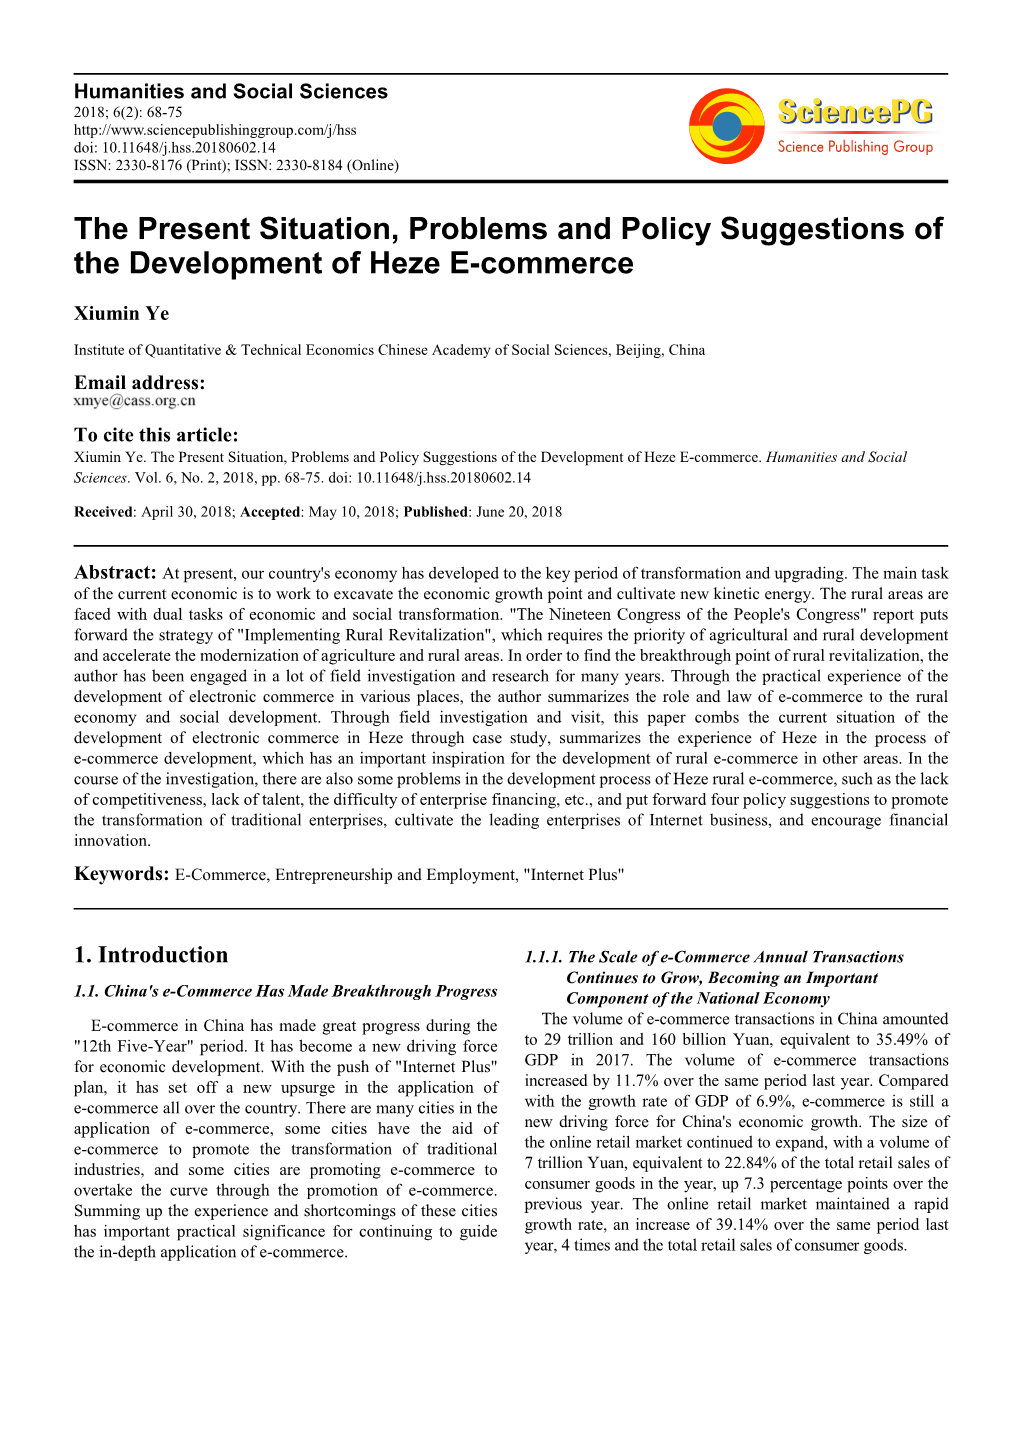 The Present Situation, Problems and Policy Suggestions of the Development of Heze E-Commerce